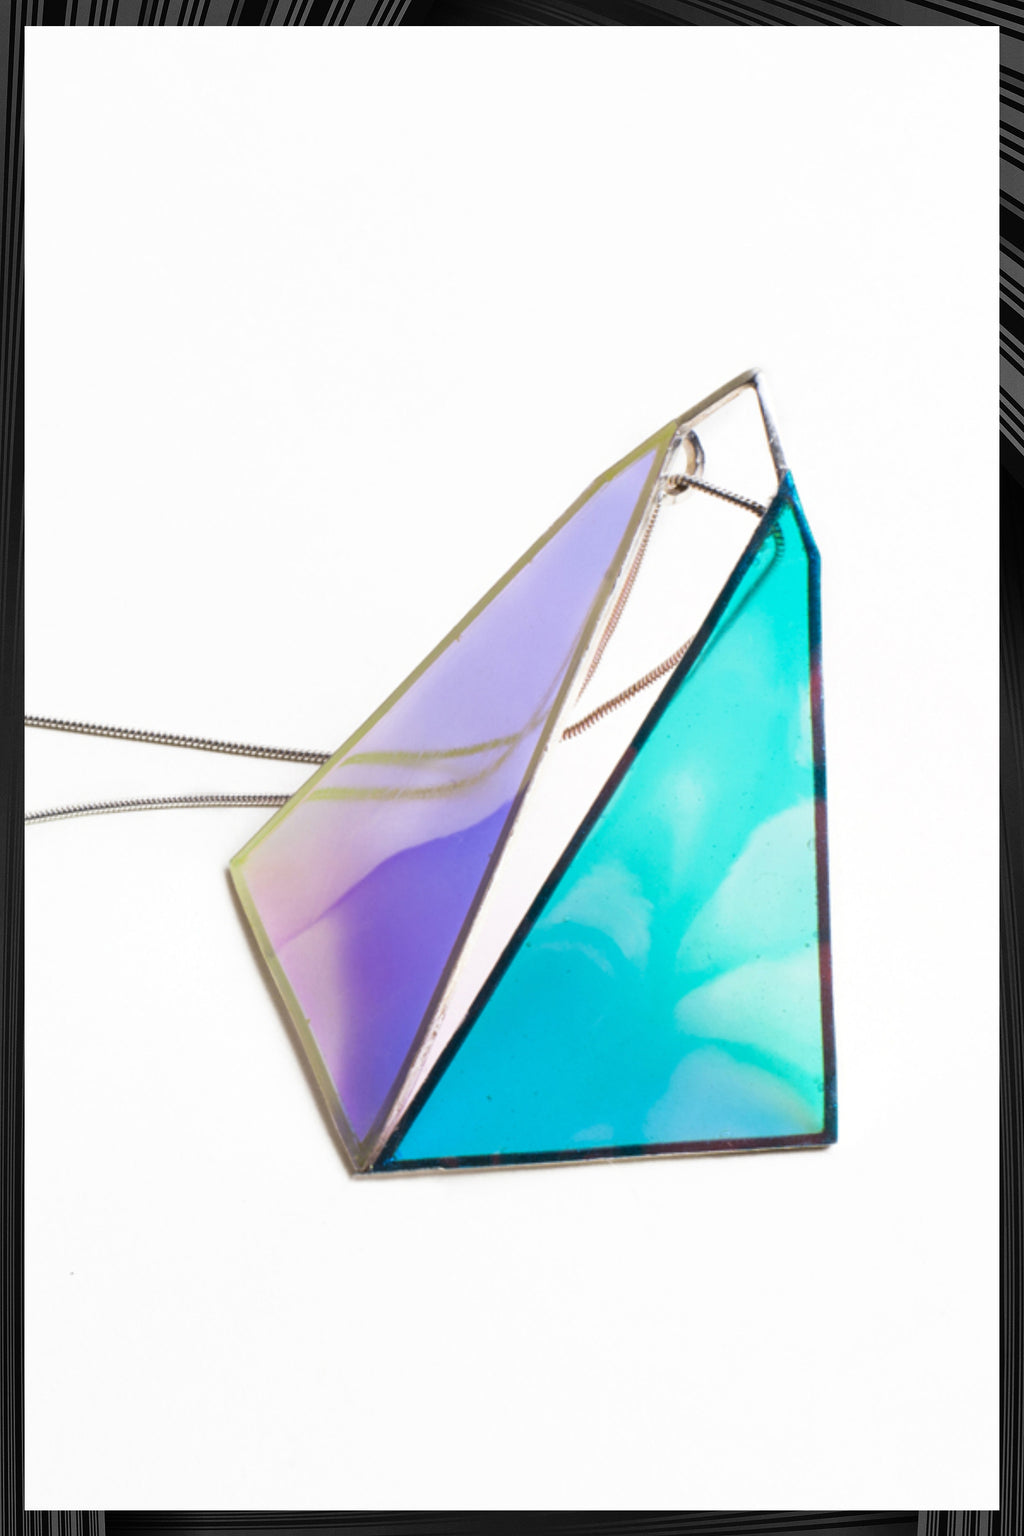 Kite Pendant | Free Delivery - 2-3 Week Shipping